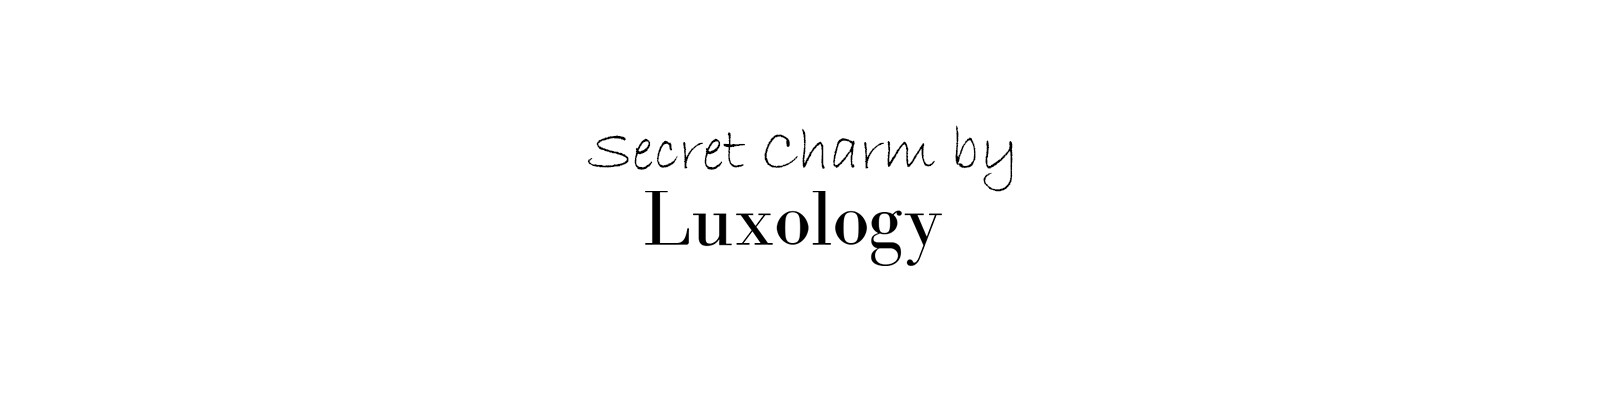 Secret Charm by Luxology